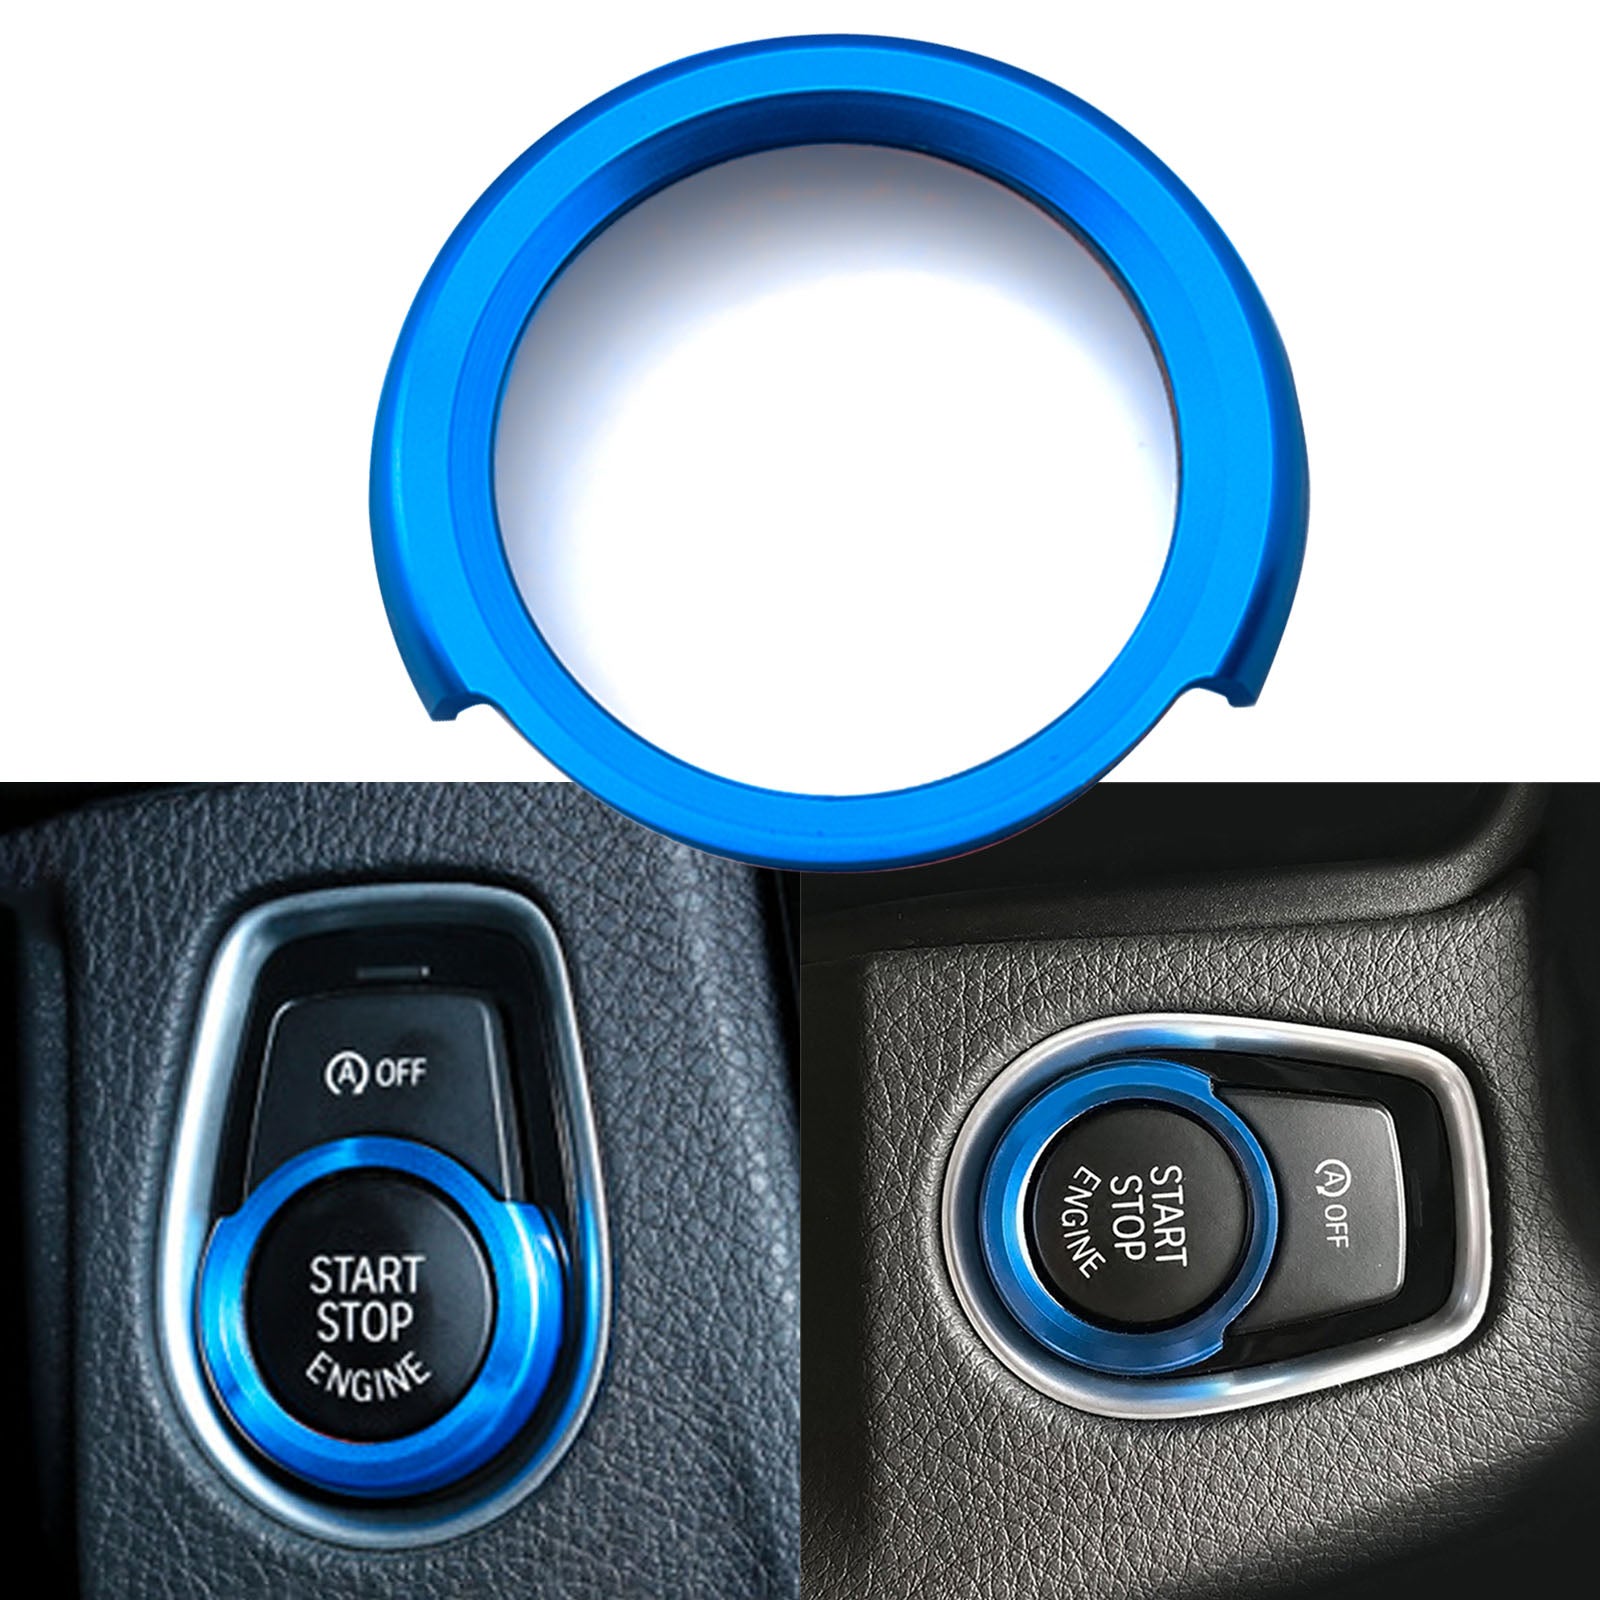 Ignition Trim Ring - Who has one?